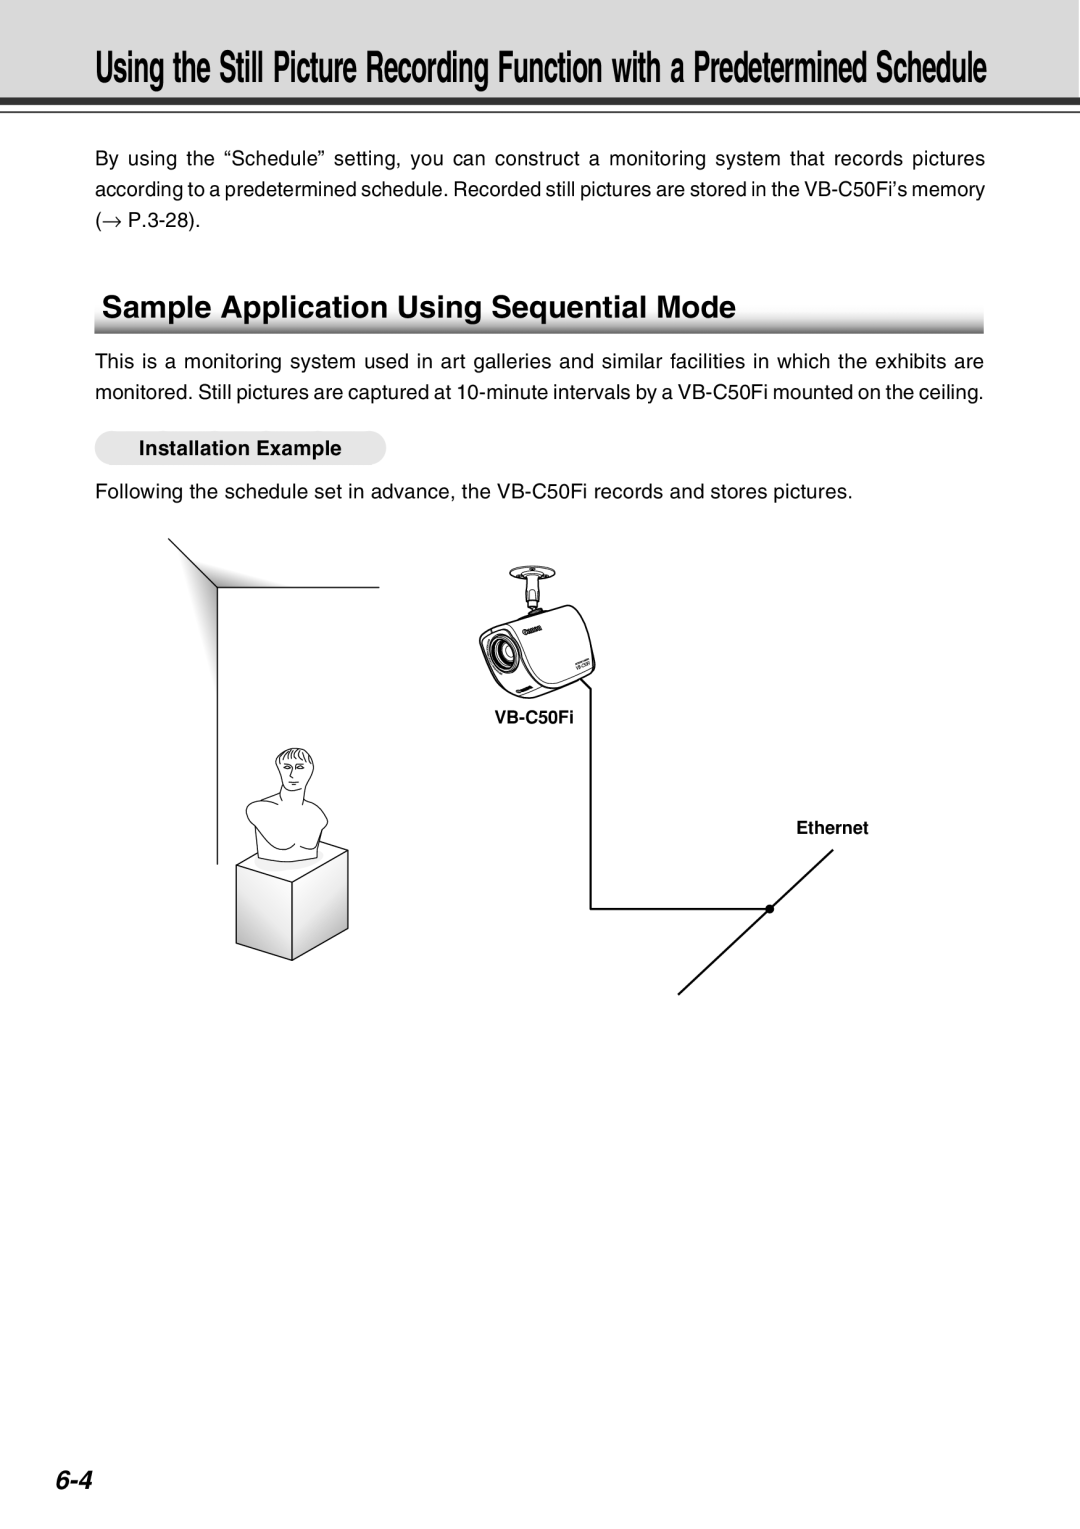 Canon Vb-C50fi user manual Sample Application Using Sequential Mode, Installation Example 